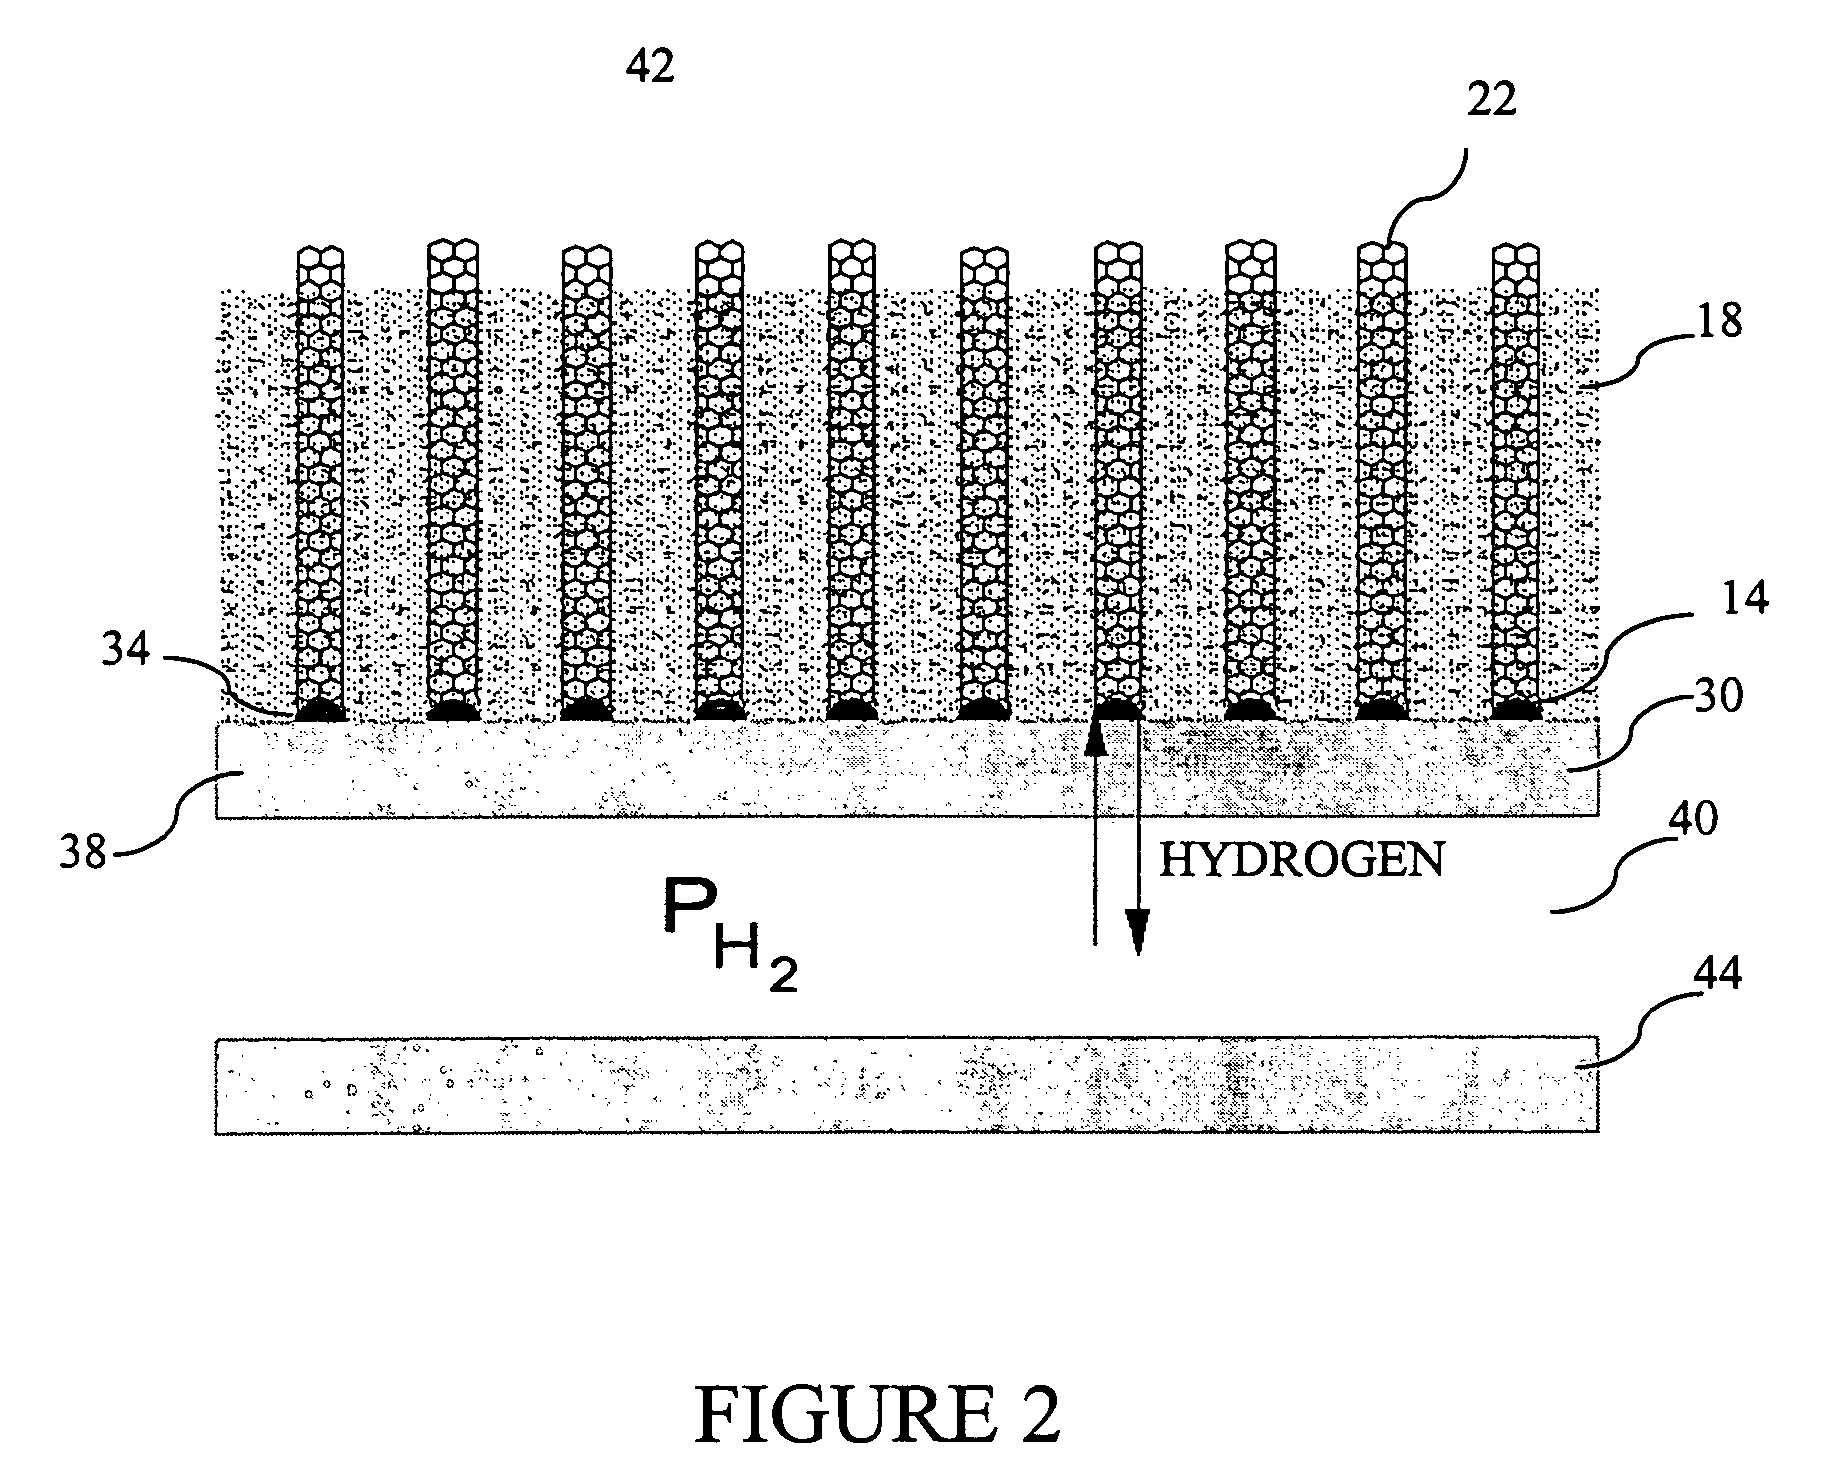 System and method for controlling hydrogen elimination during carbon nanotube synthesis from hydrocarbons